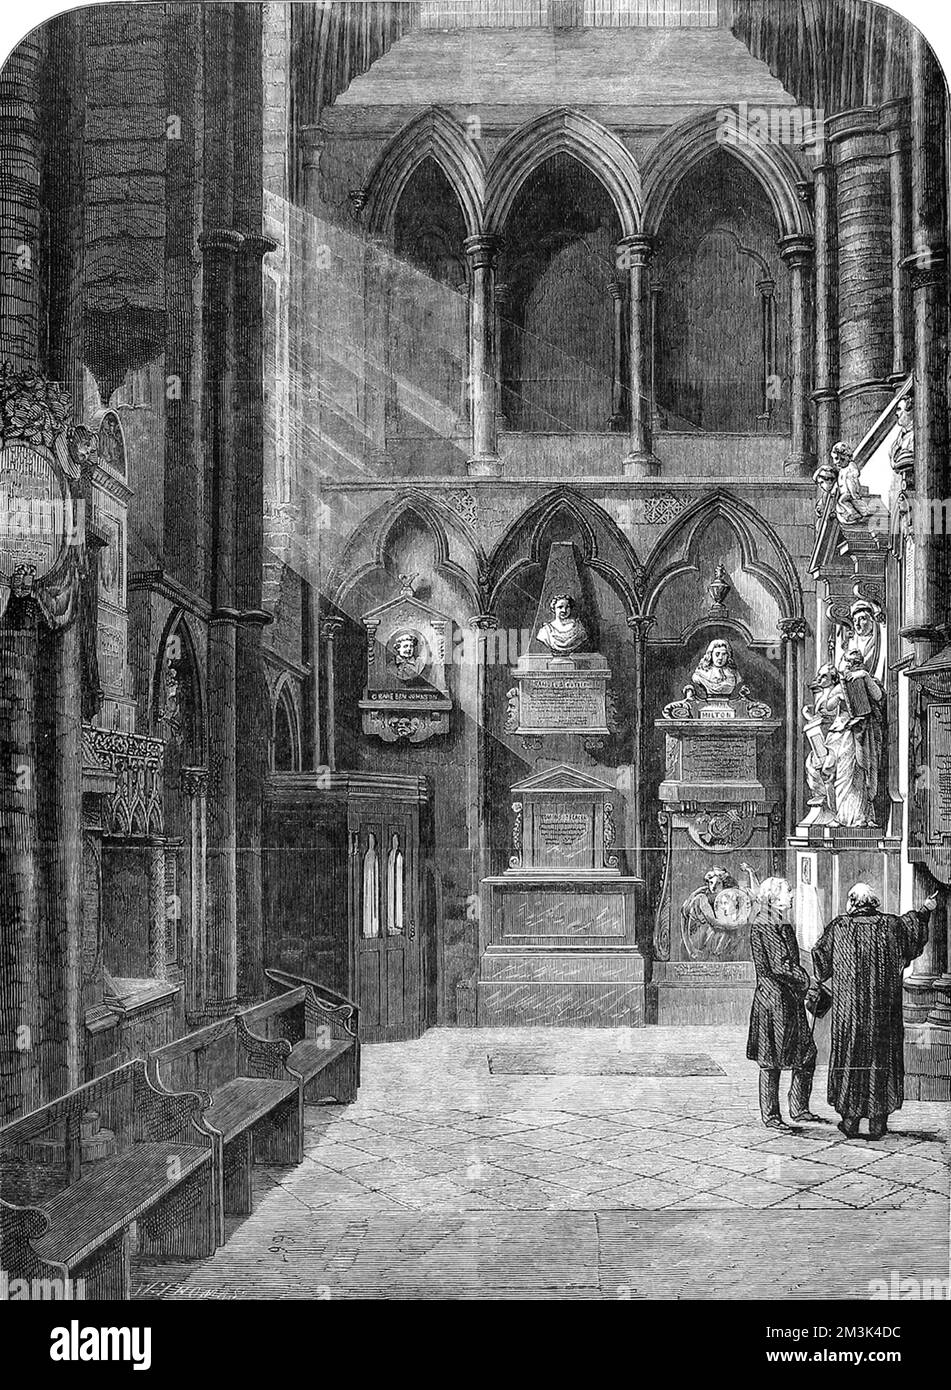 The 'Poets Corner' of Westminster Abbey, where many of the greatest poets of England are buried or commemorated, 1860. Stock Photo